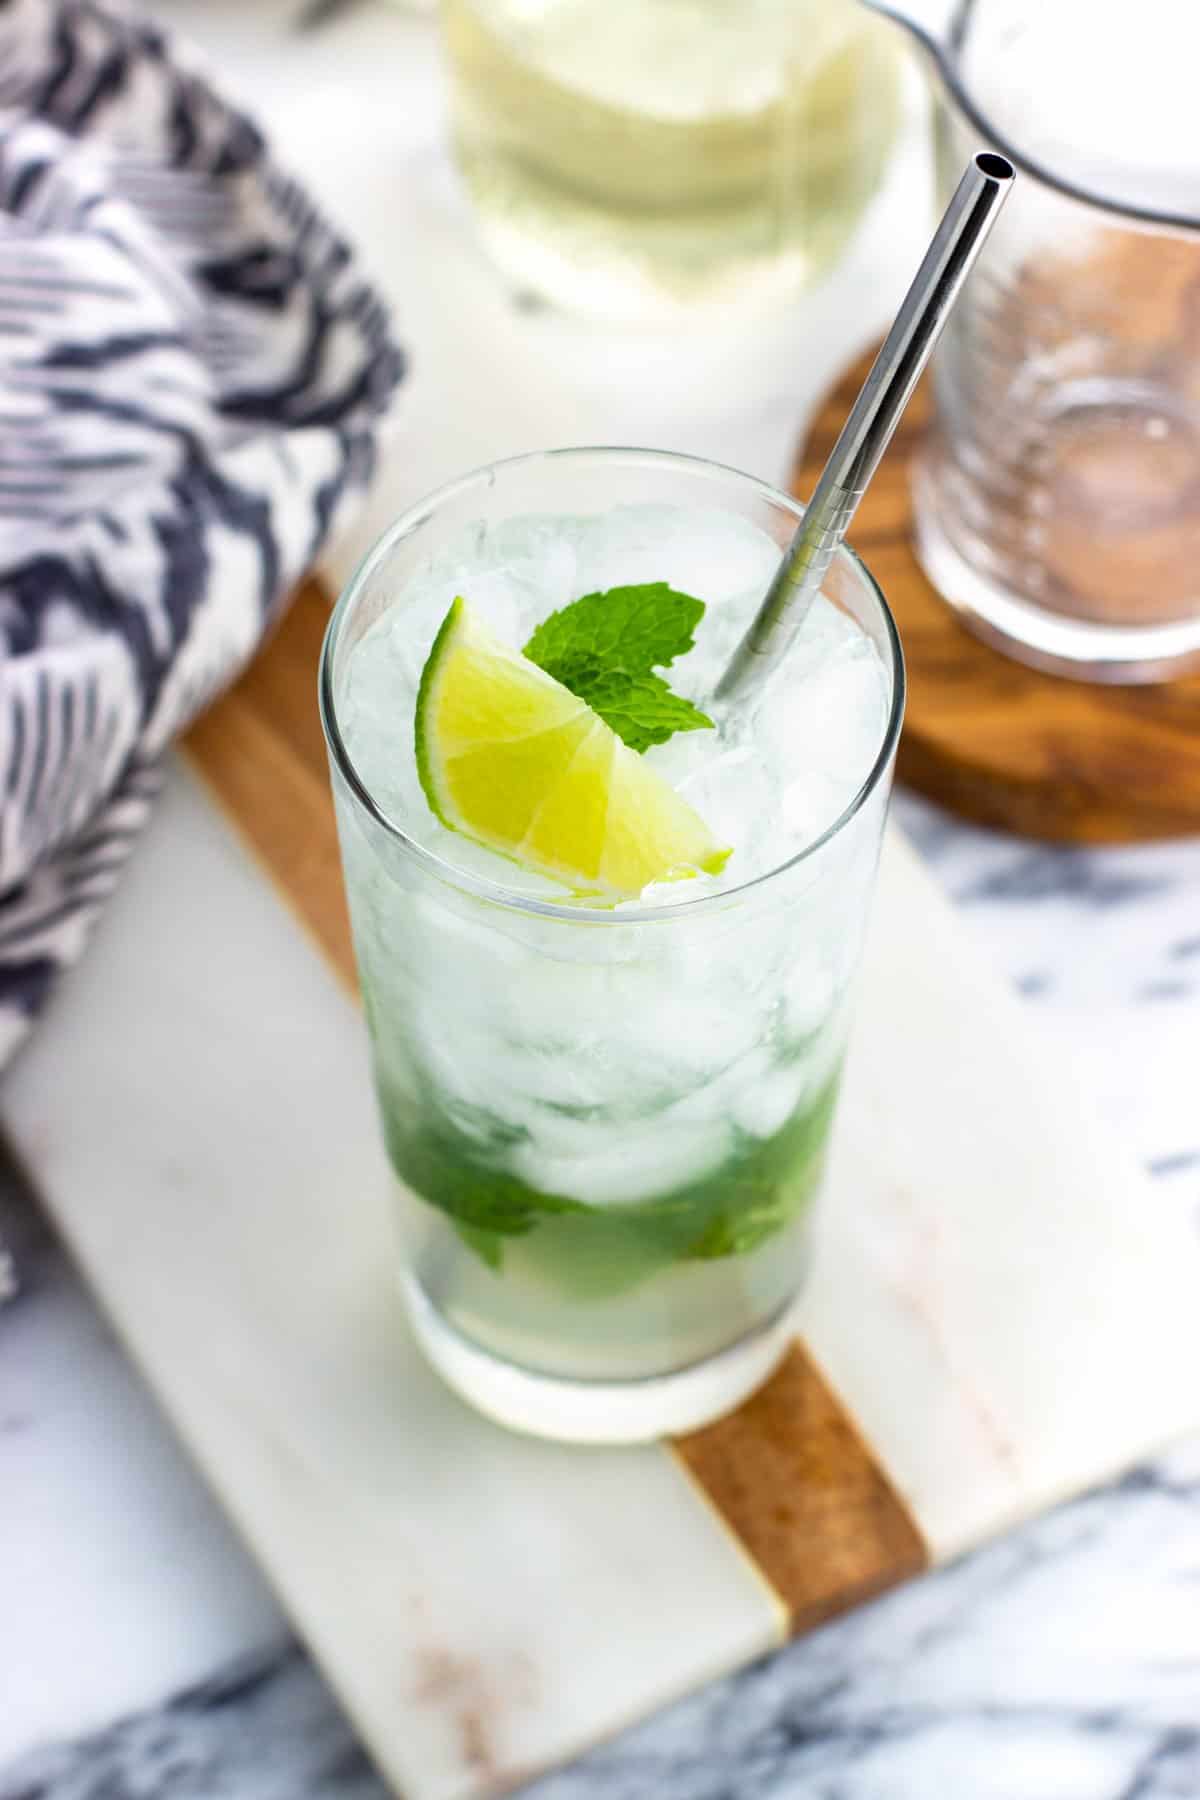 A virgin mojito garnished with lime and mint leaves with a metal straw.